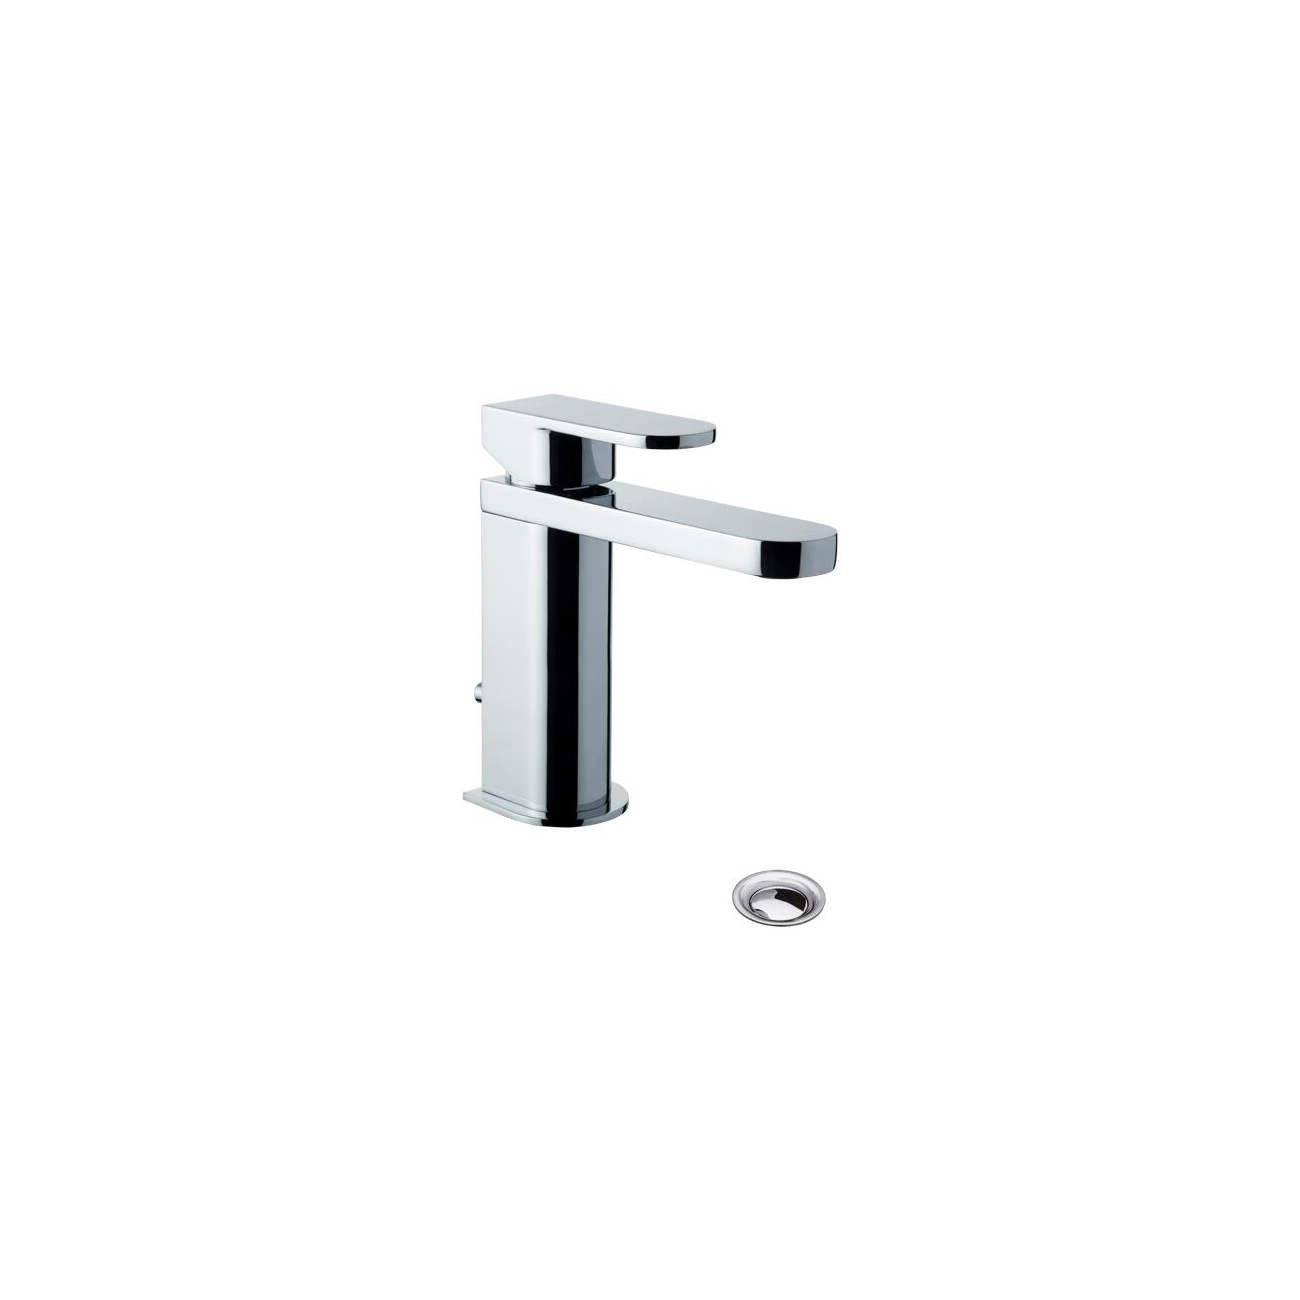 BELLOSTA BABY S 7205 Single Lever Mixed for Sink